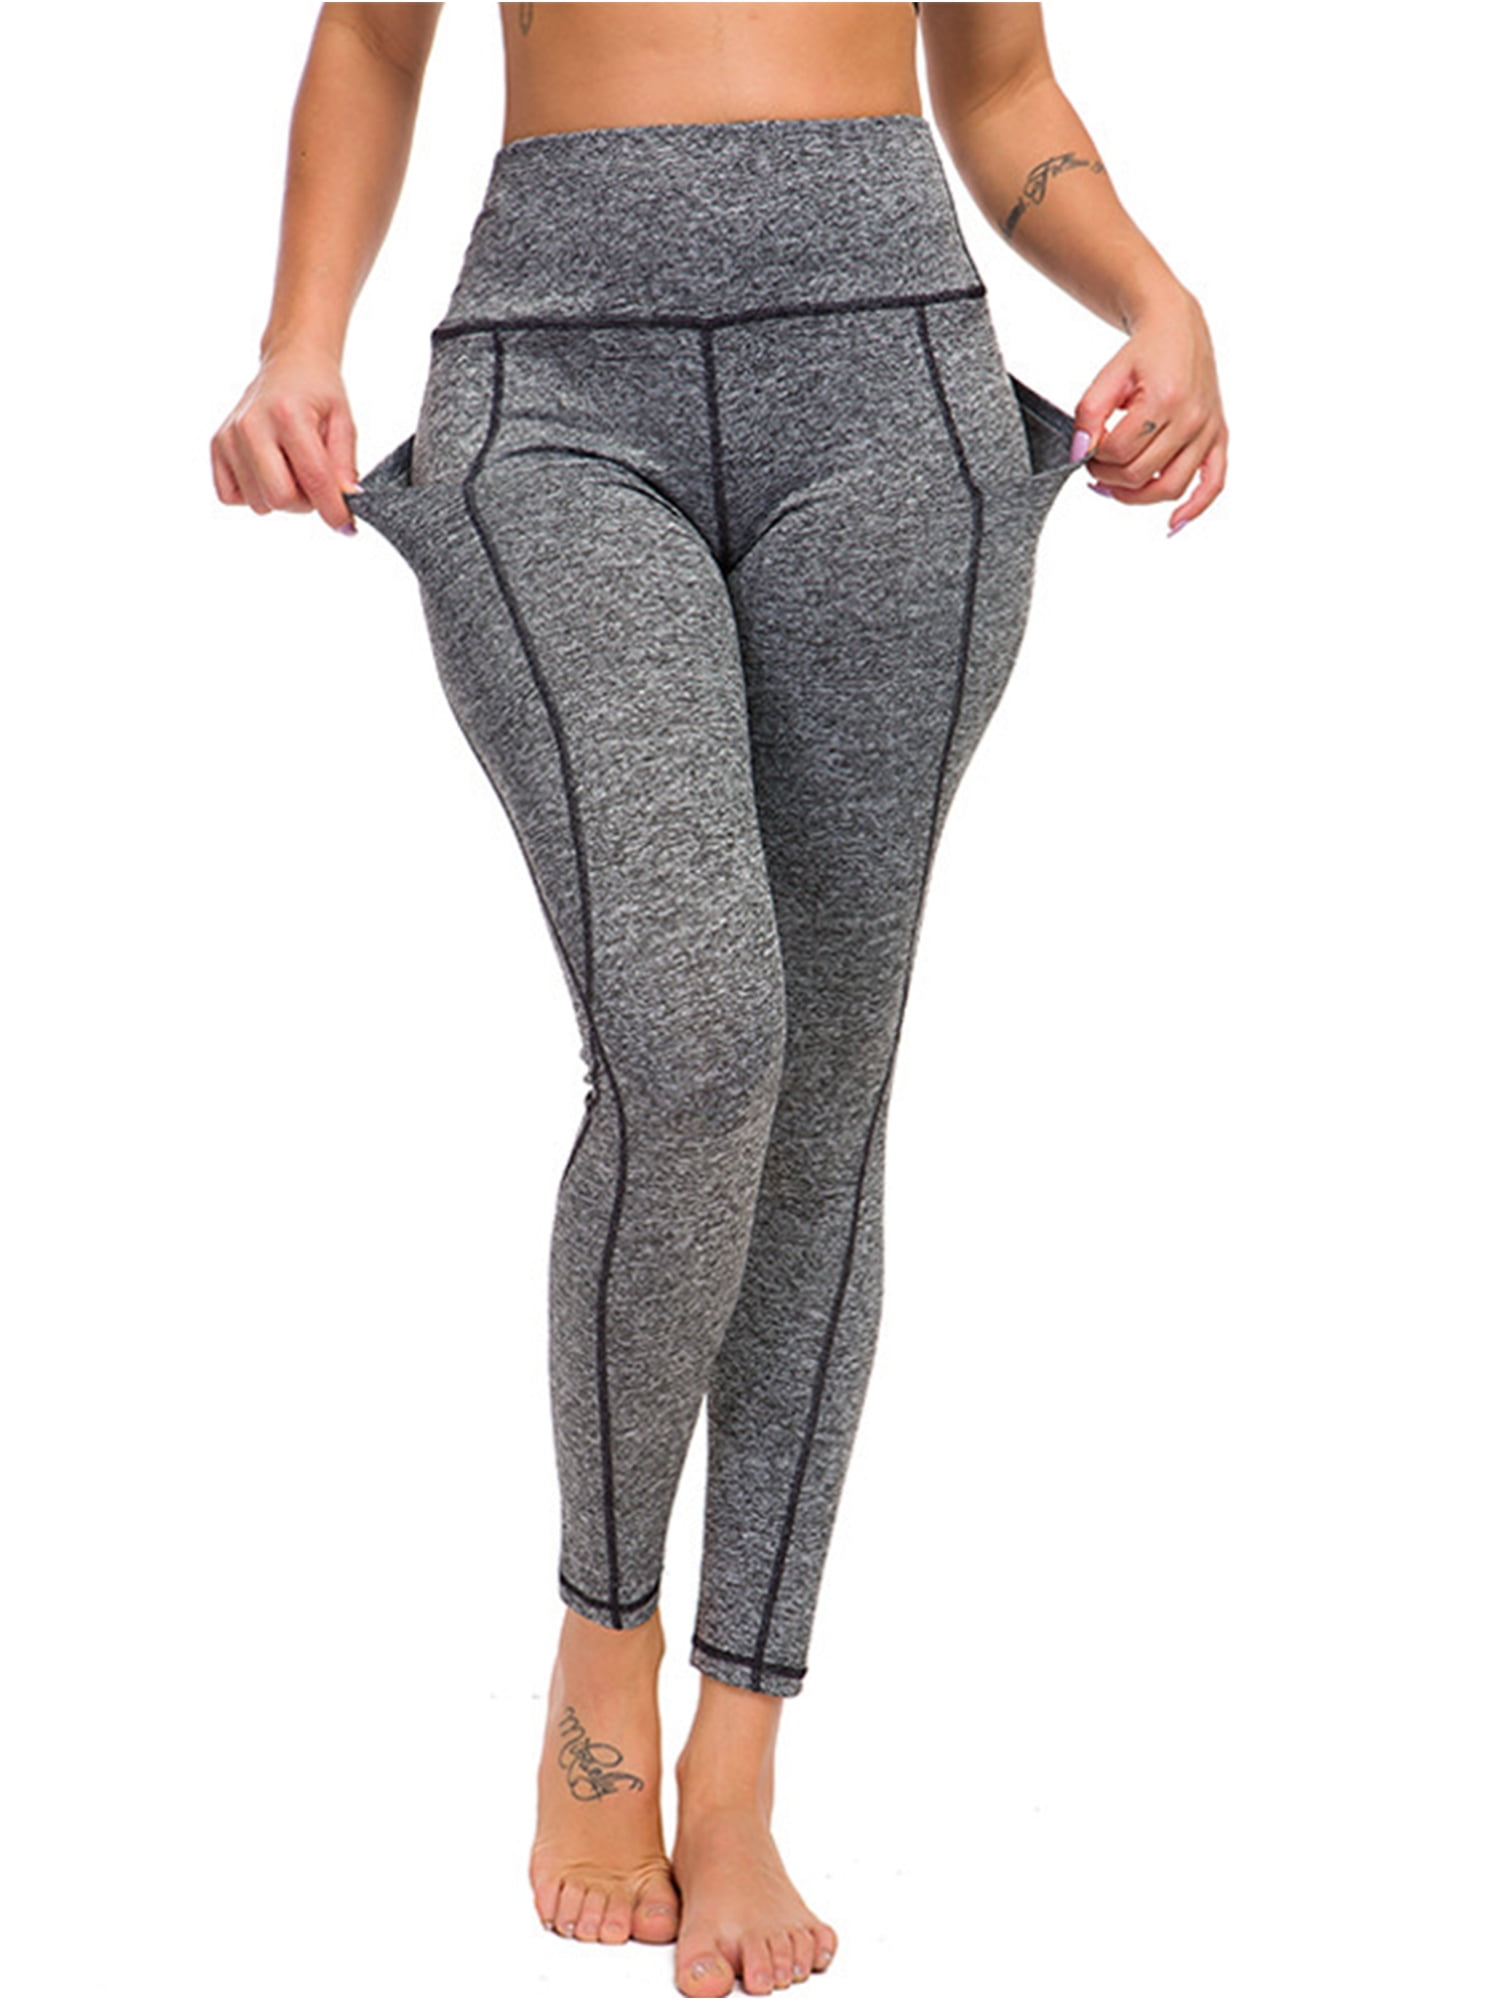 Details about   Womens High Waist Sports Fitness Yoga Pants Gym Run Workout Tights With Pockets 